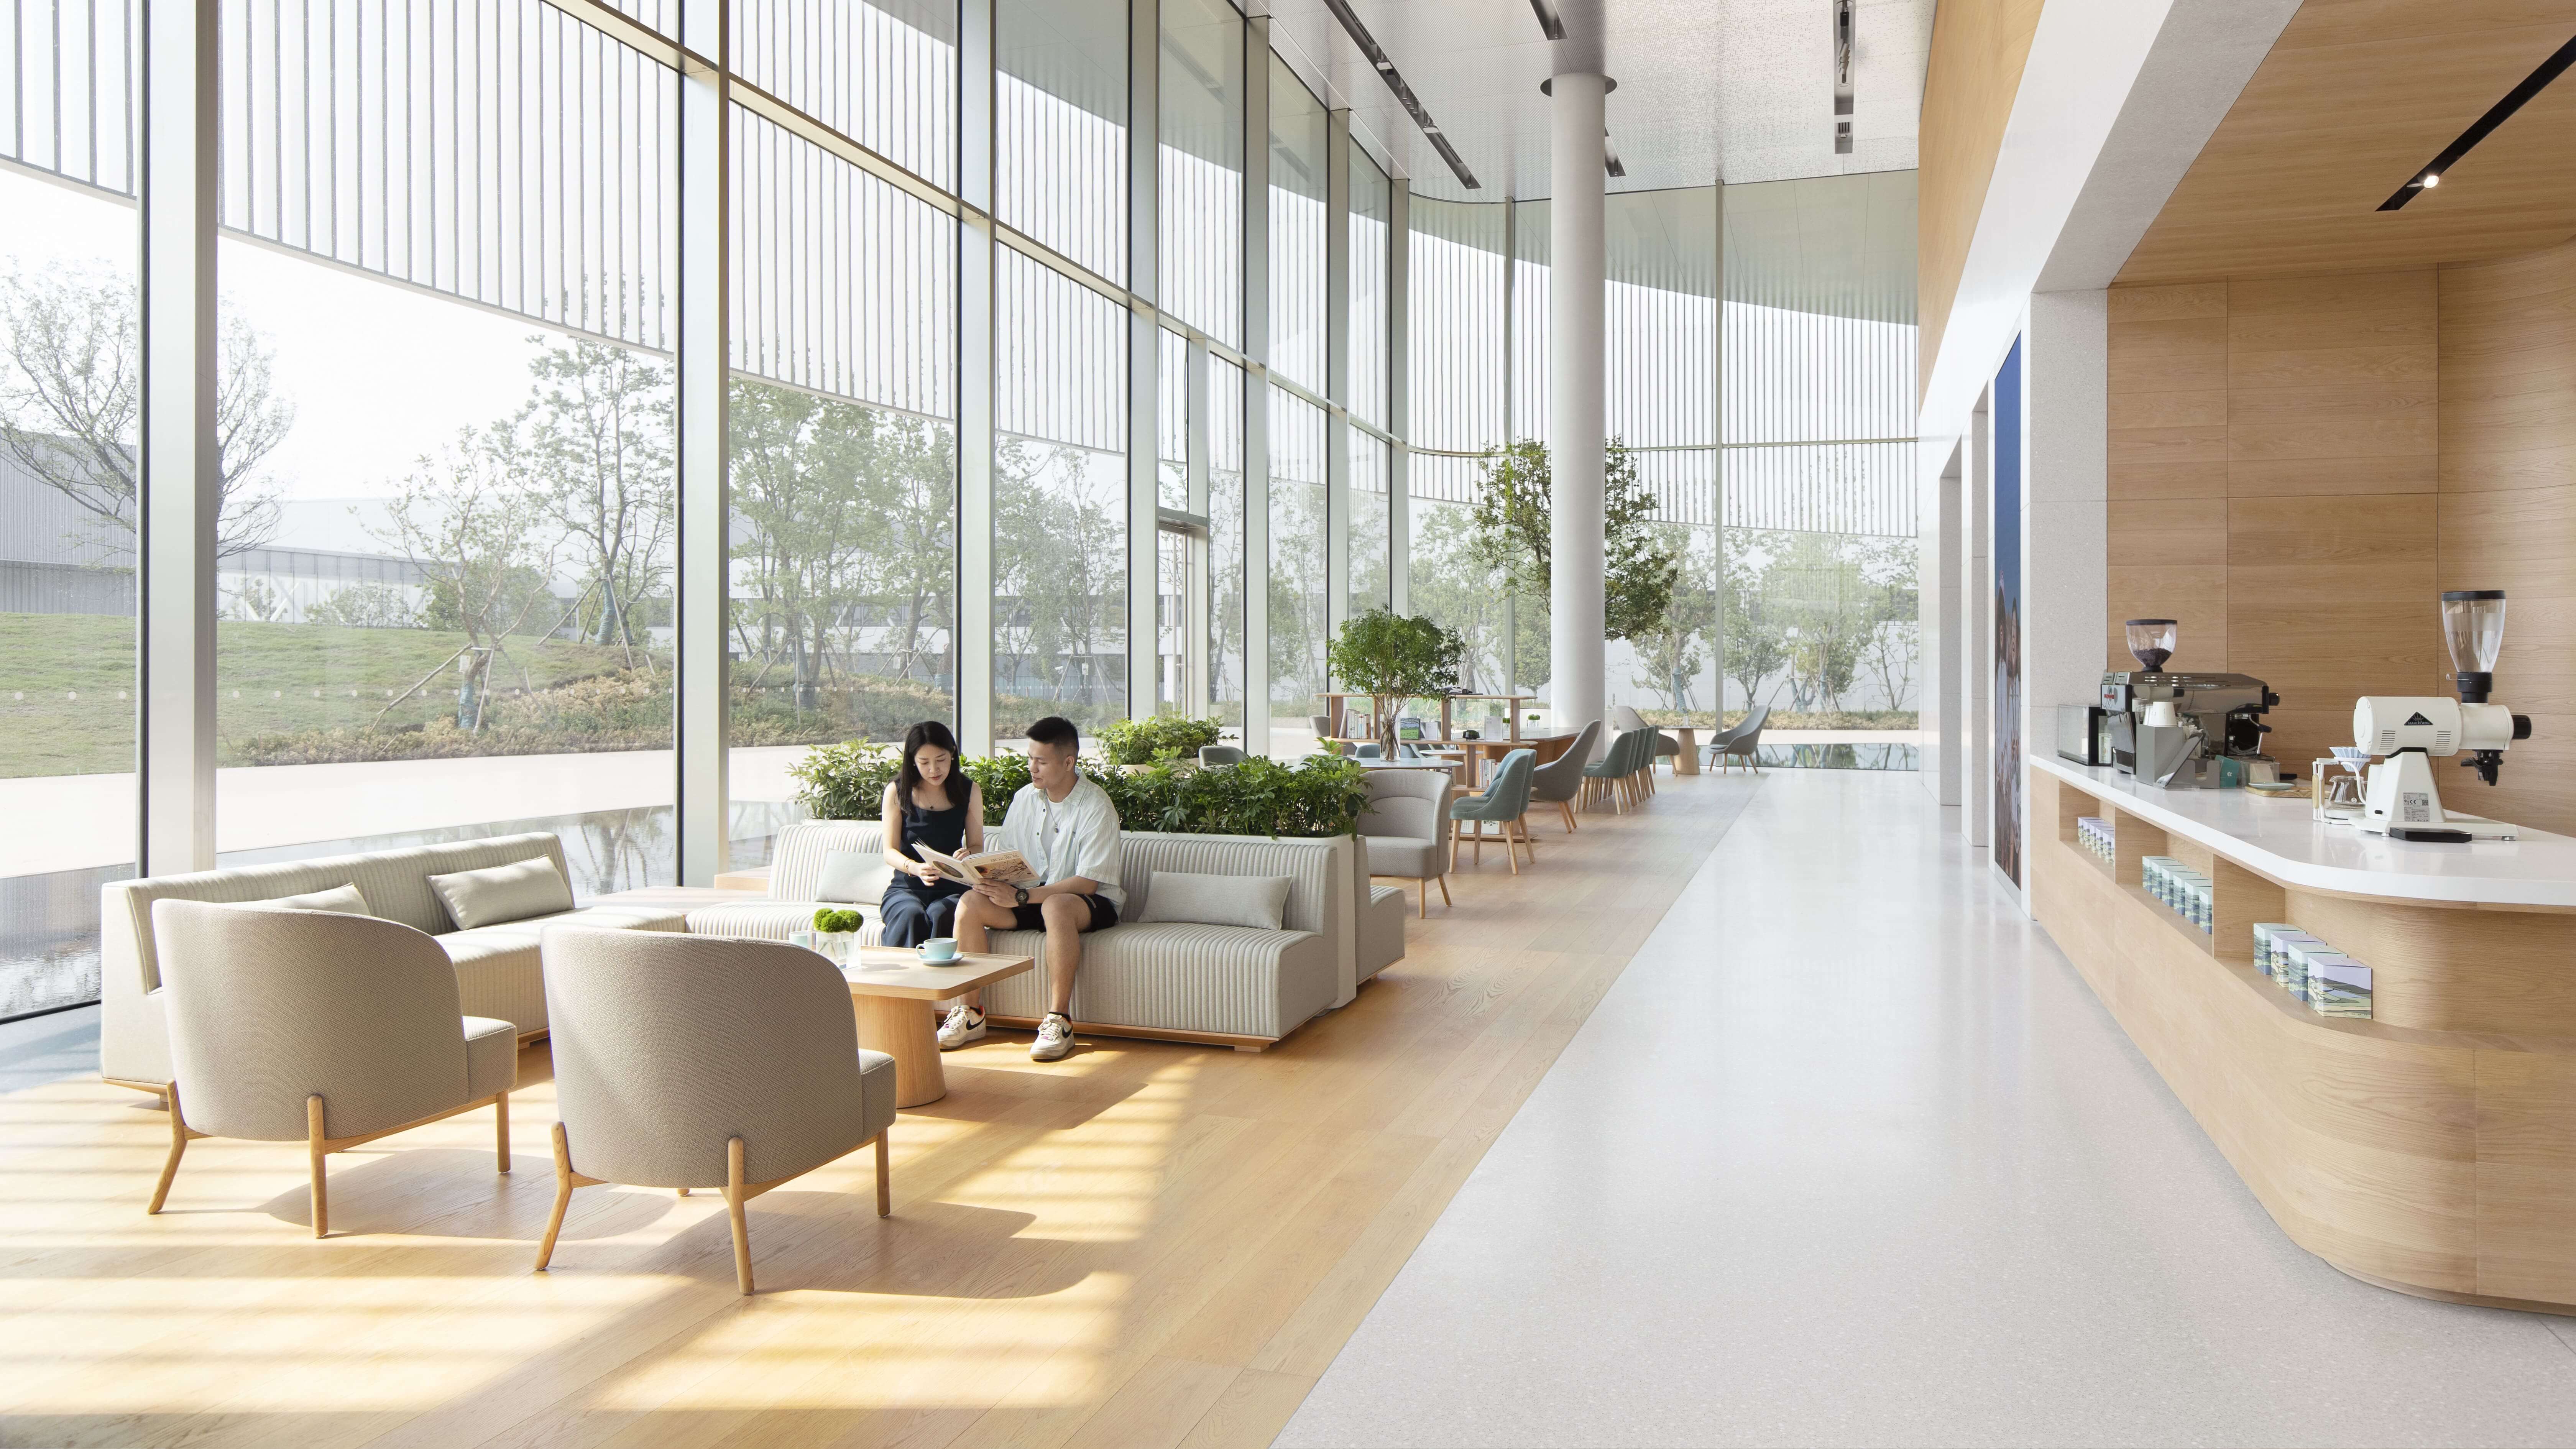 NIO House｜Hefei Xinqiao Industrial Park Now Officially Open